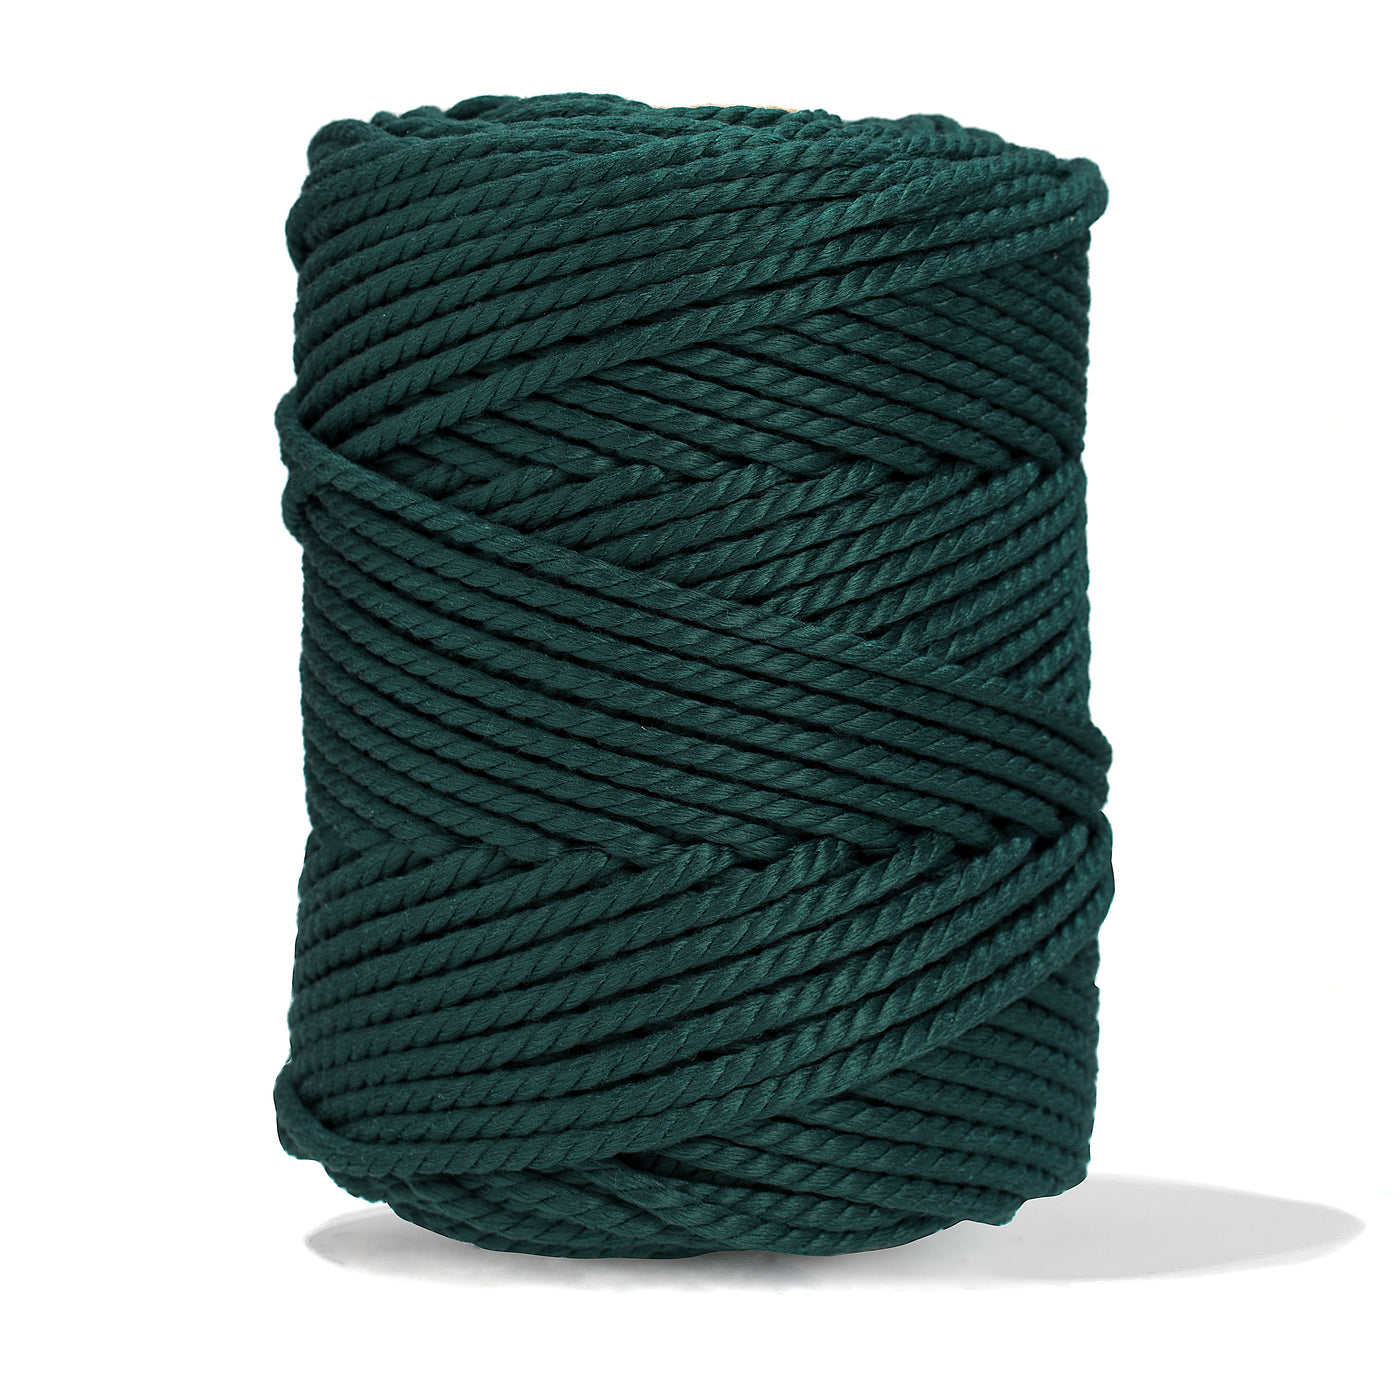 OUTDOOR RECYCLED CORD 3 MM - 3 PLY -  FOREST GREEN COLOR